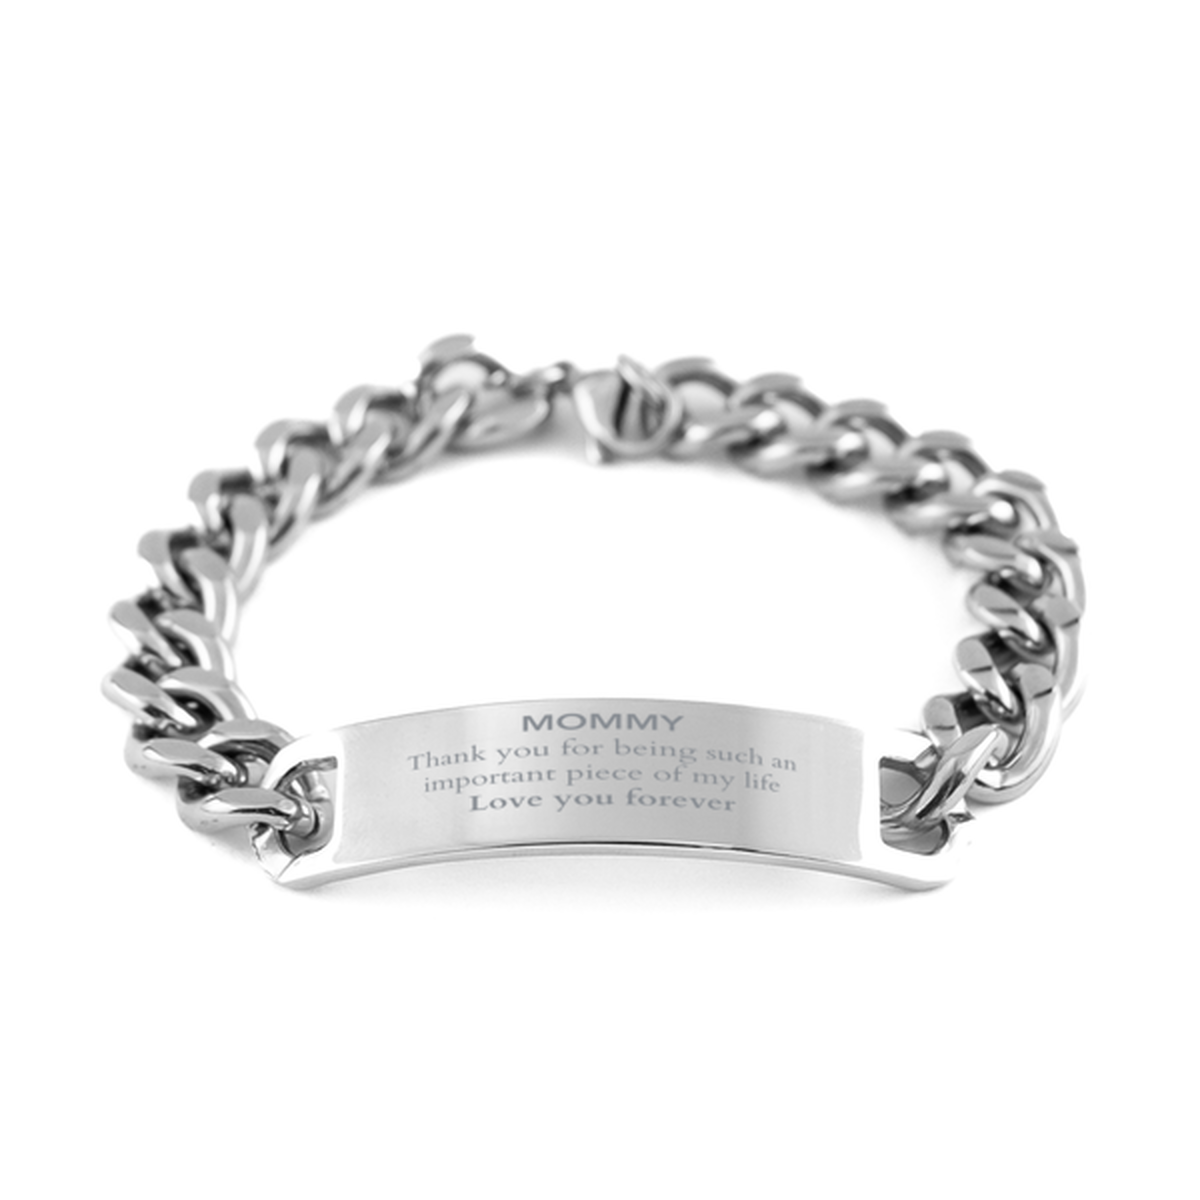 Appropriate Mommy Cuban Chain Stainless Steel Bracelet Epic Birthday Gifts for Mommy Thank you for being such an important piece of my life Mommy Christmas Mothers Fathers Day